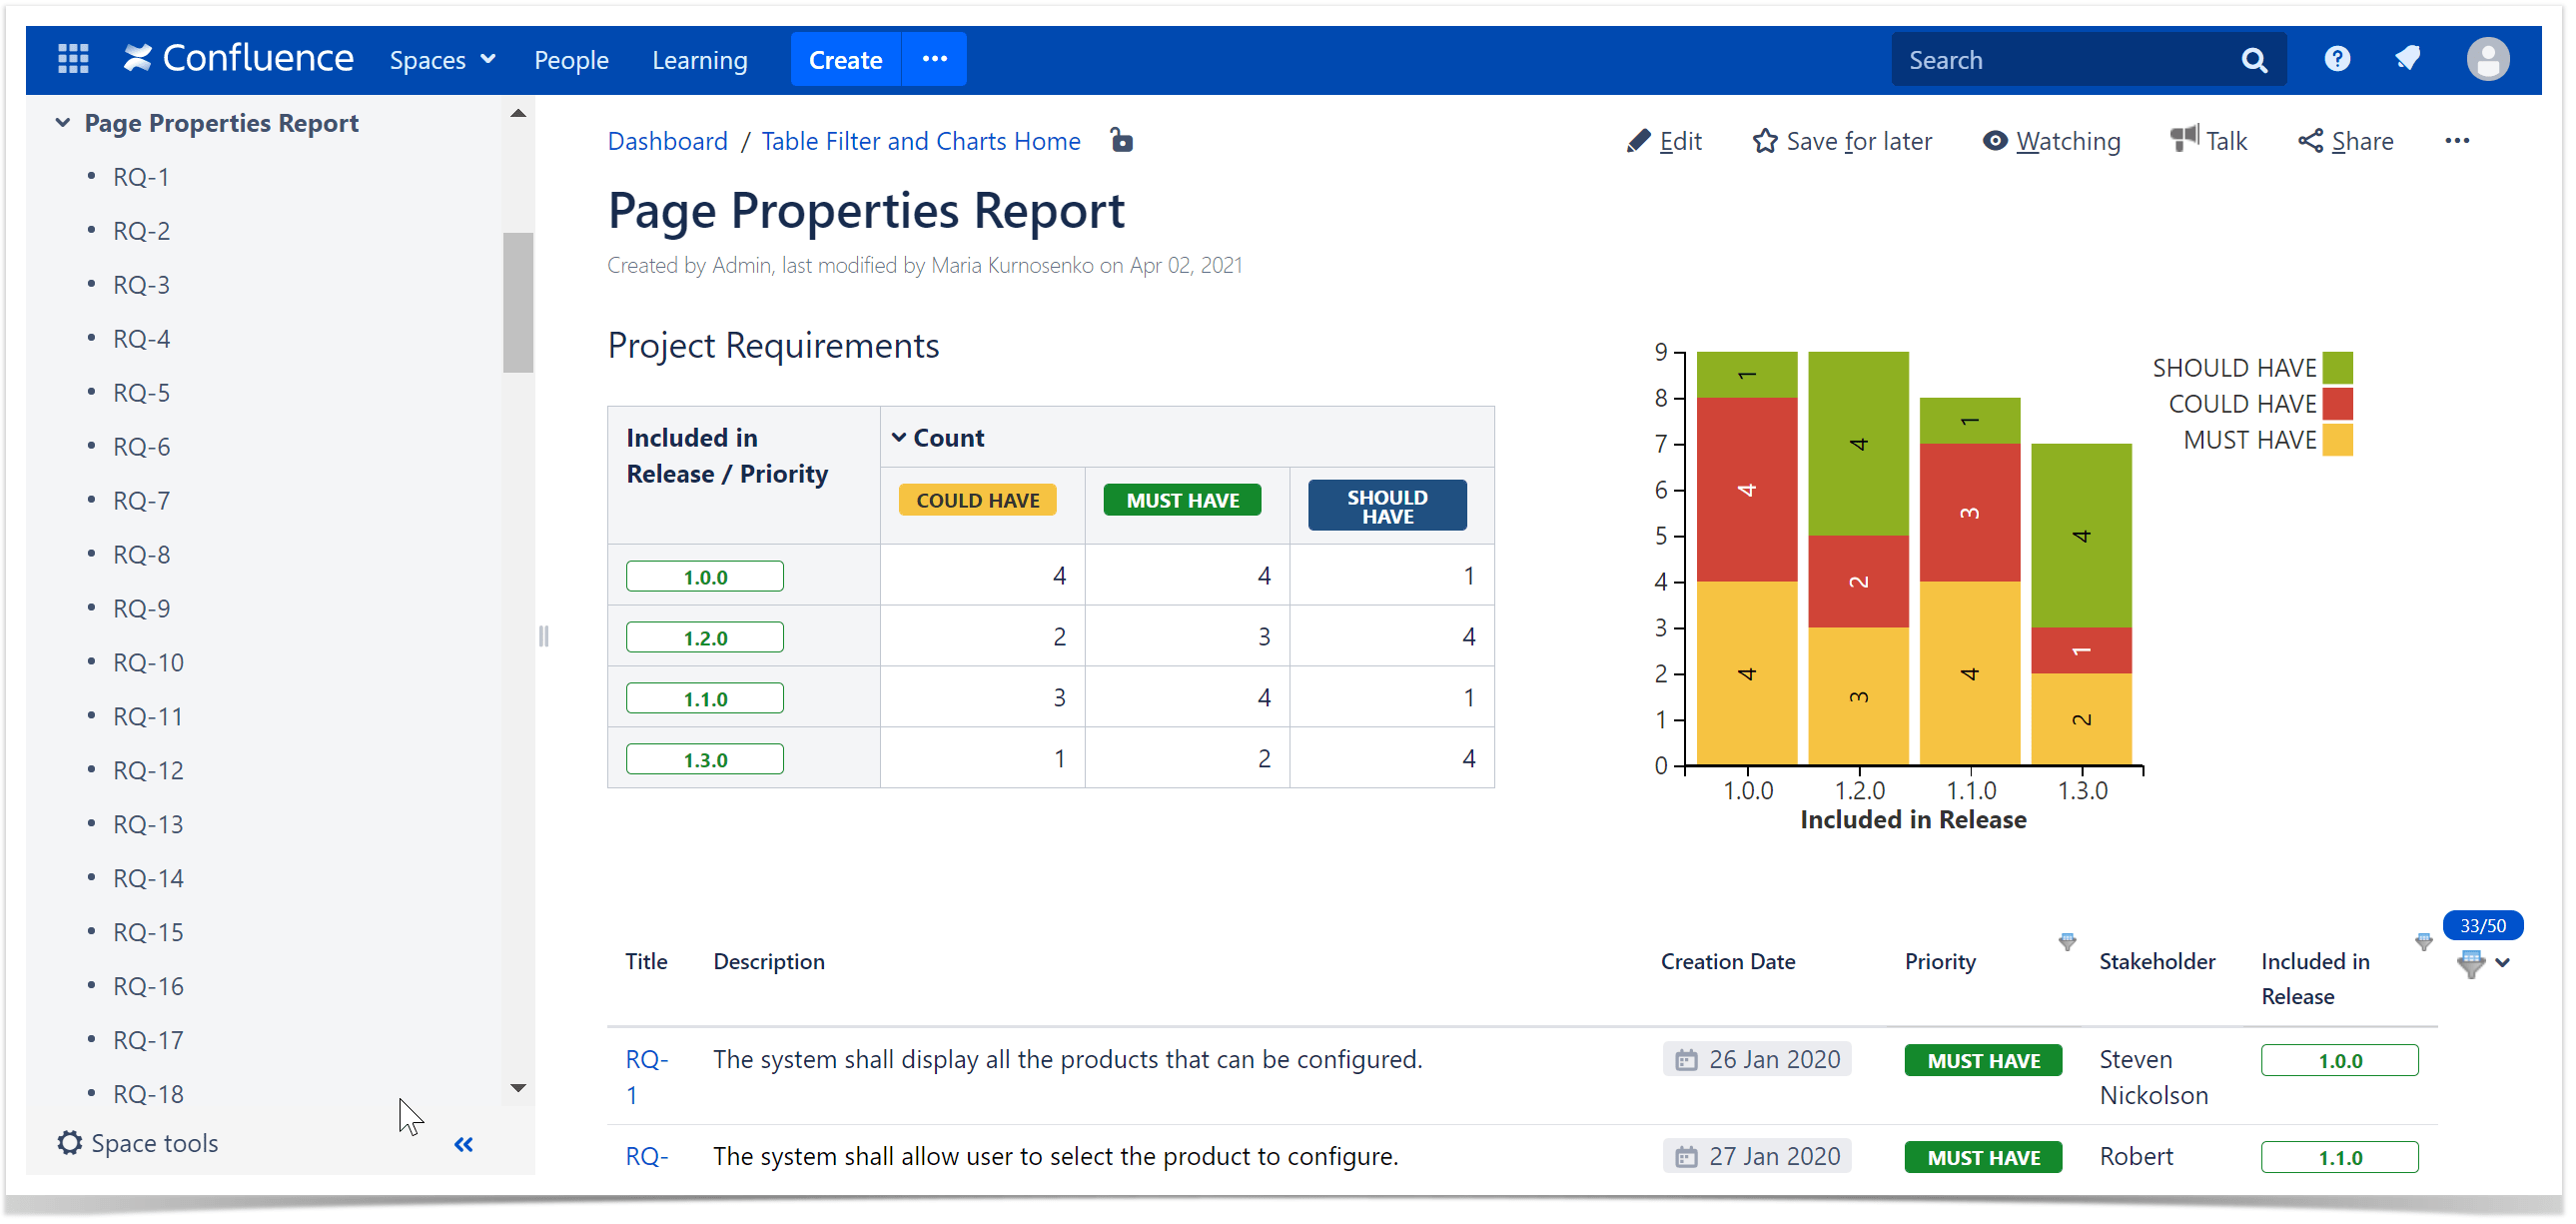 A dashboard based on the Page Properties report table